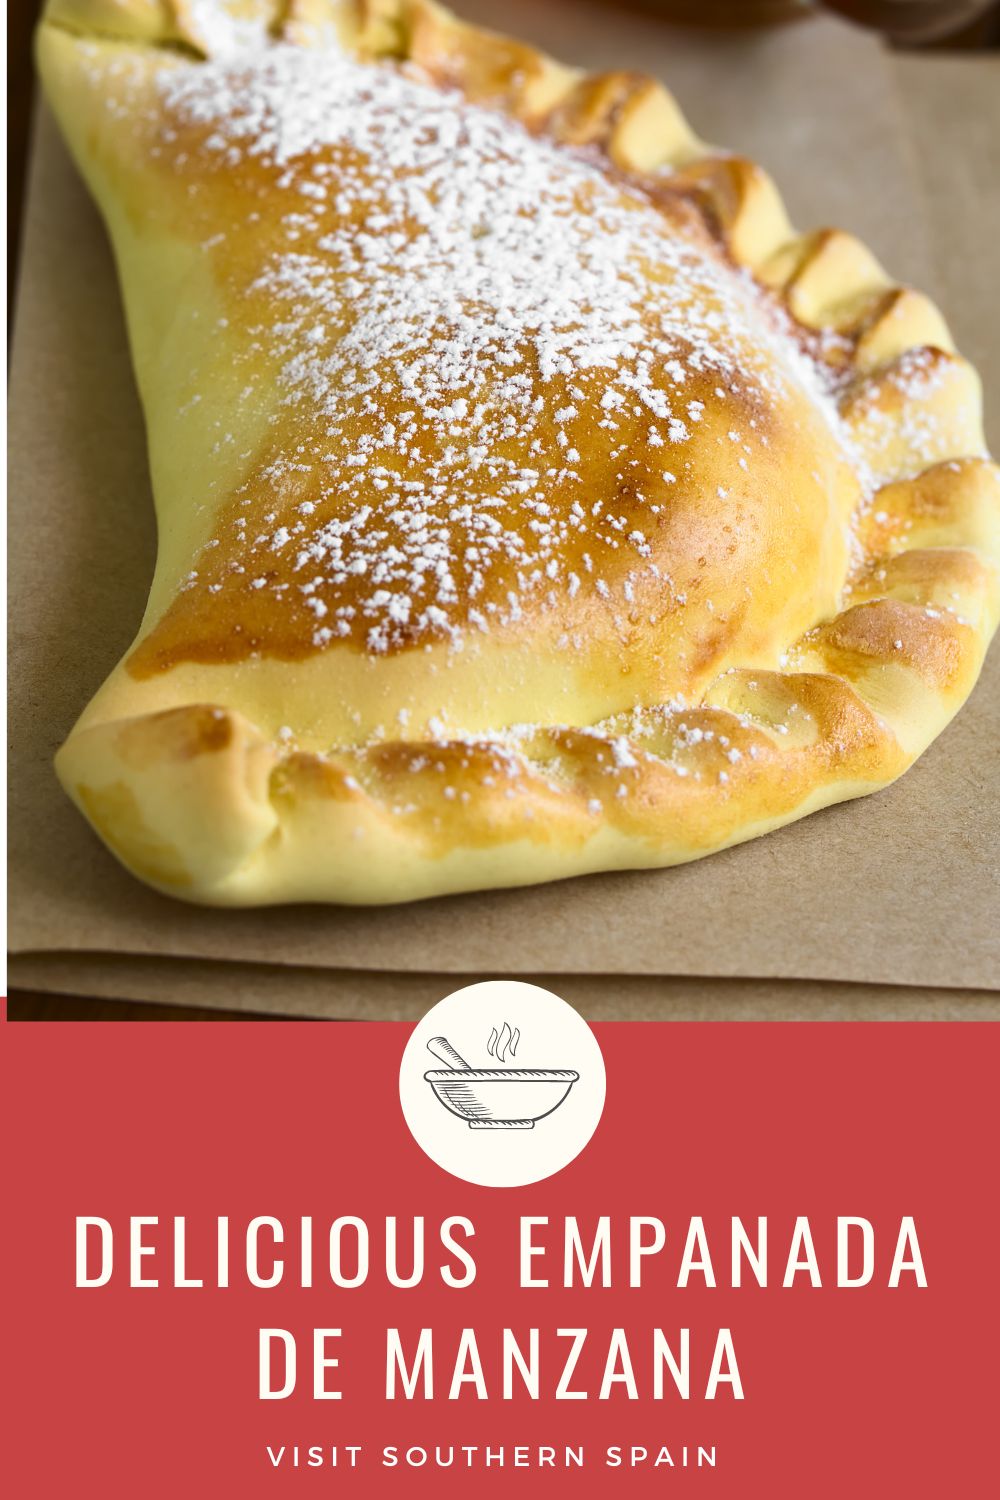 Are you looking for a Delicious Empanada de Manzana recipe from Spain? These apple empanadas are precisely what you need if you want to feel like you're in Spain when eating them. The apple empanada recipe is easy to make and once you've eaten them, you wouldn't want to make any other apple pies. This is one of the best pie recipes from Spain, where the flaky and buttery crust perfectly combines with the sweetness of the apple filling. #empanadademanzana #applepies #spanishapplepie #empanda